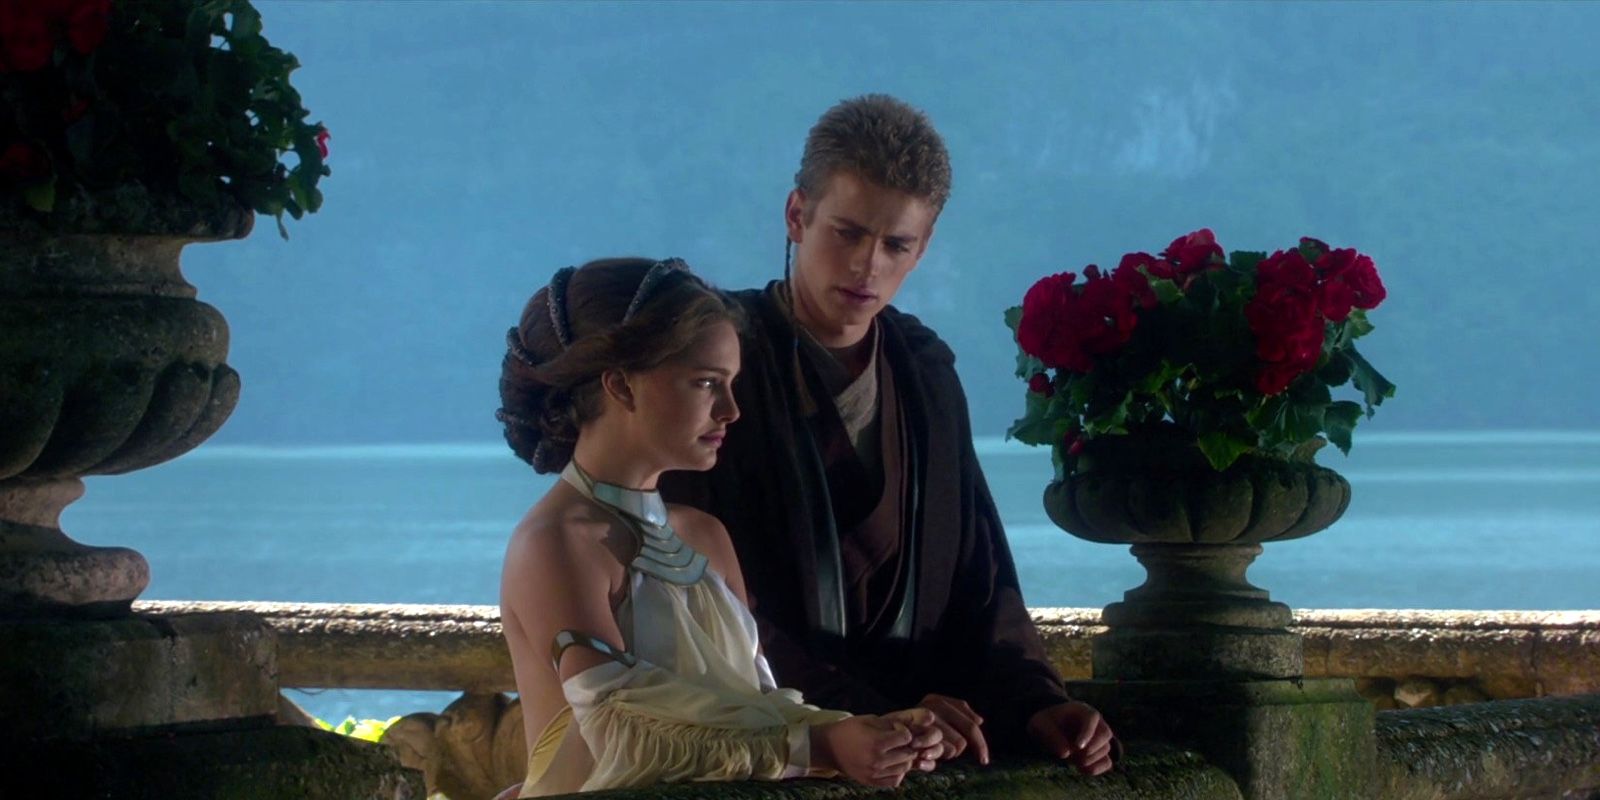 Padme and Anakin talk on the balcony in Star Wars